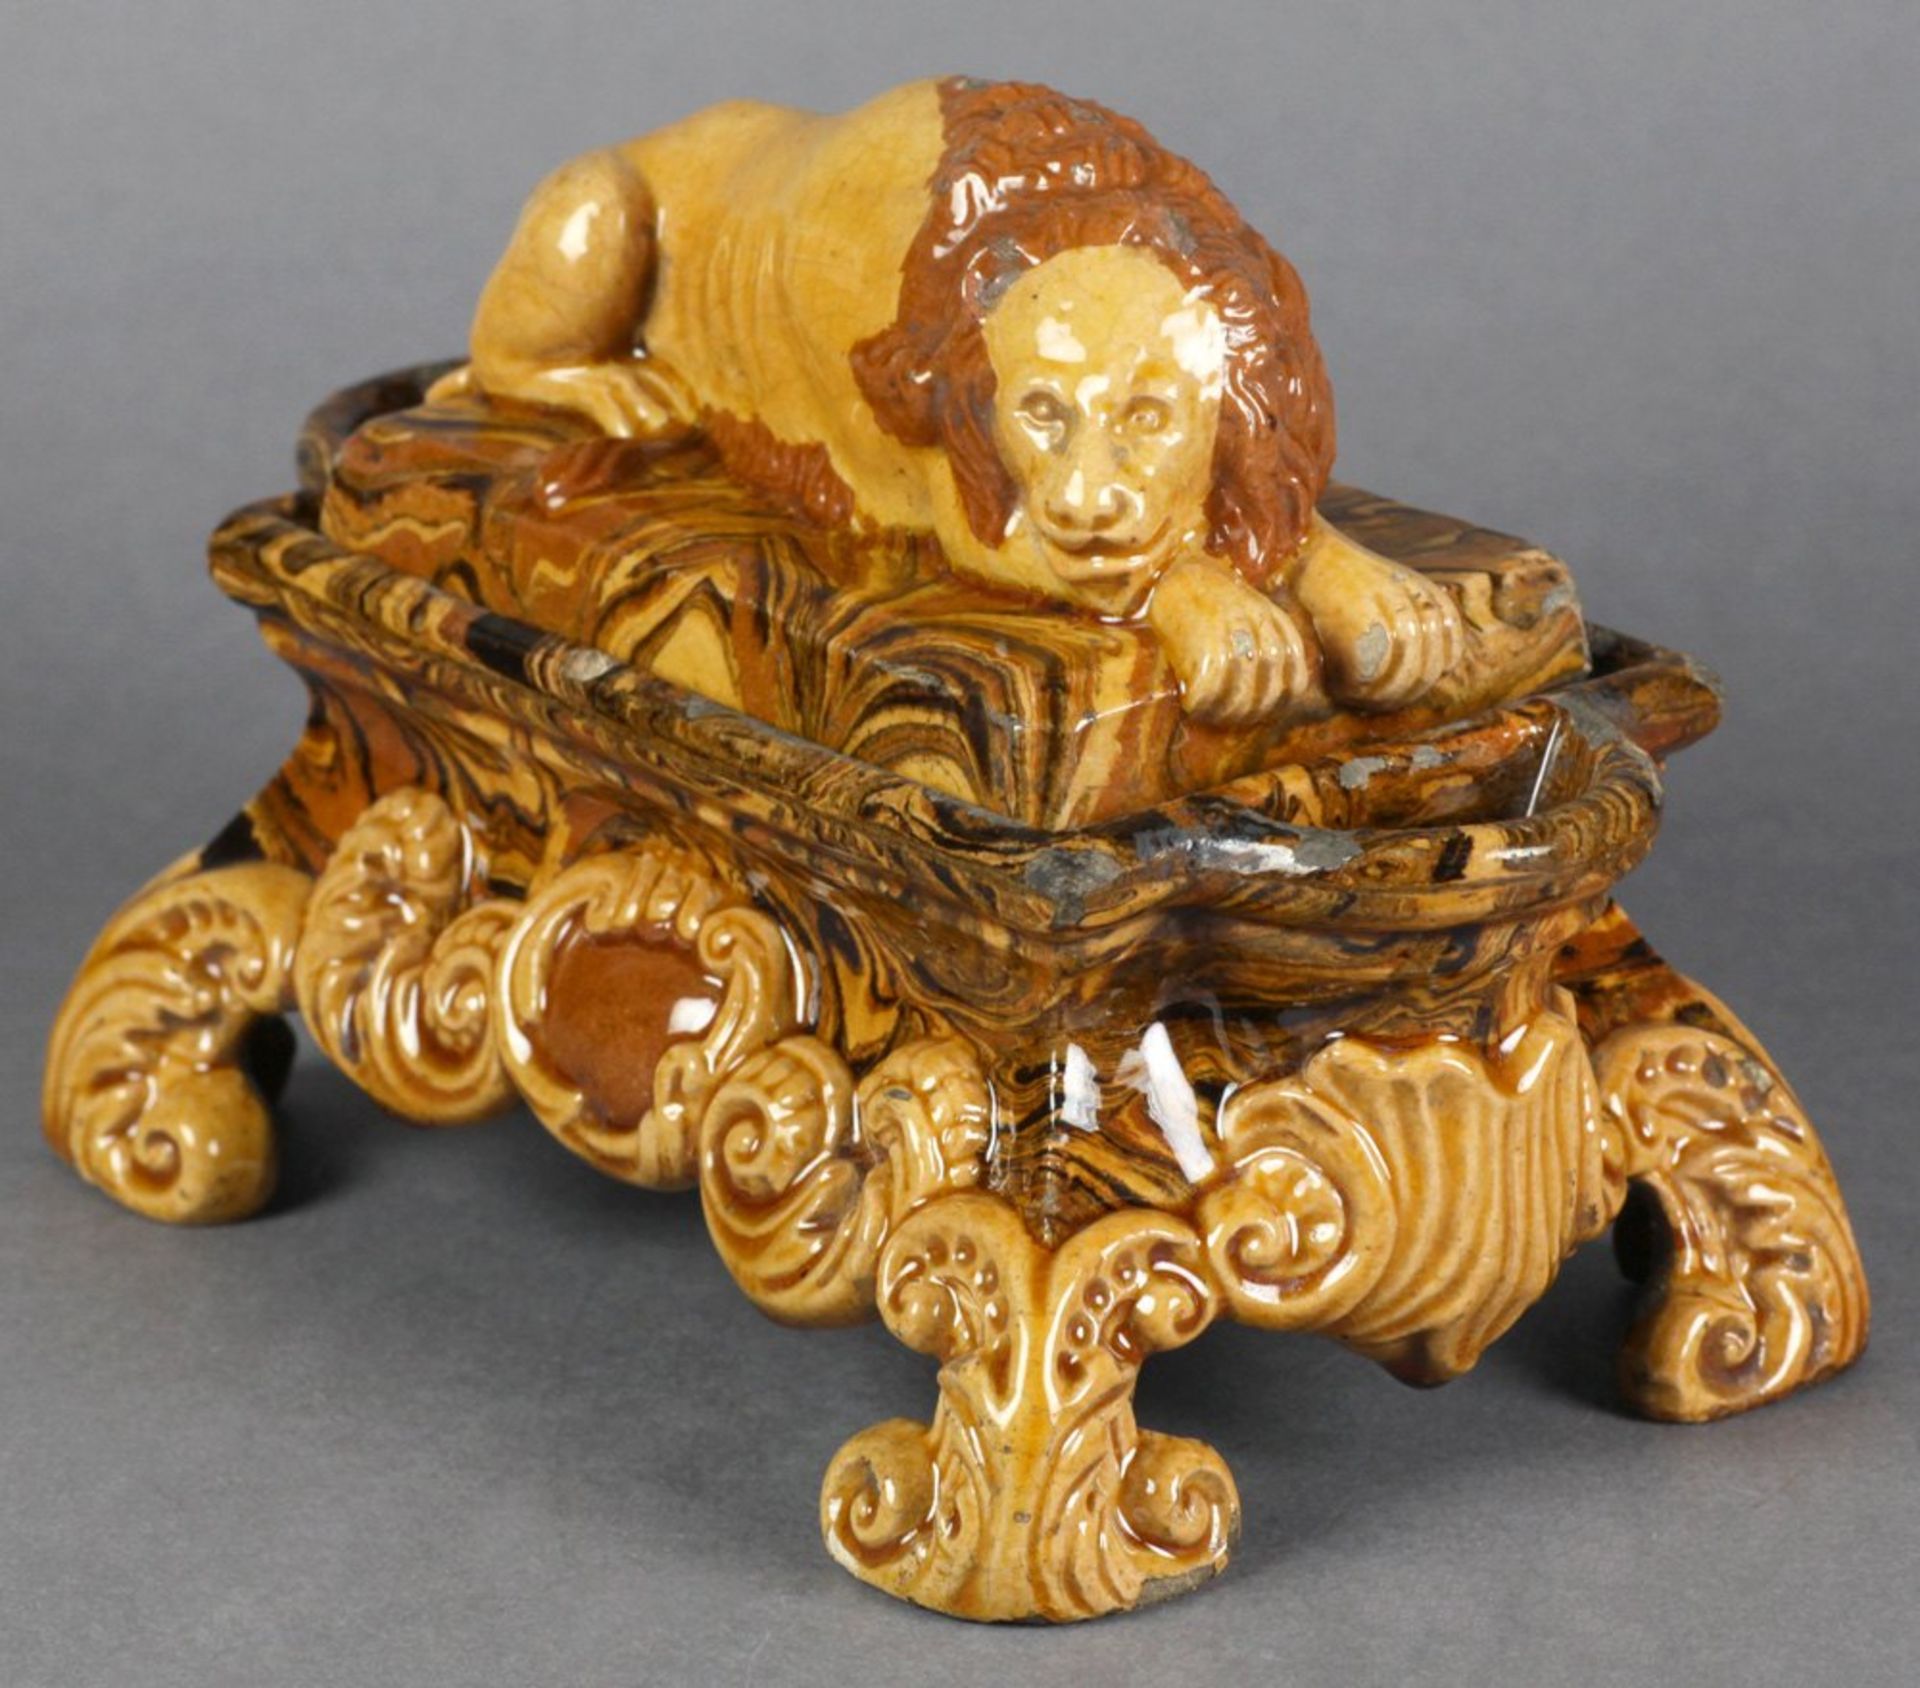 ANTIQUE REDWARE SLIPWARE LION MOUNTED INK STAND 18TH C. - Image 14 of 14